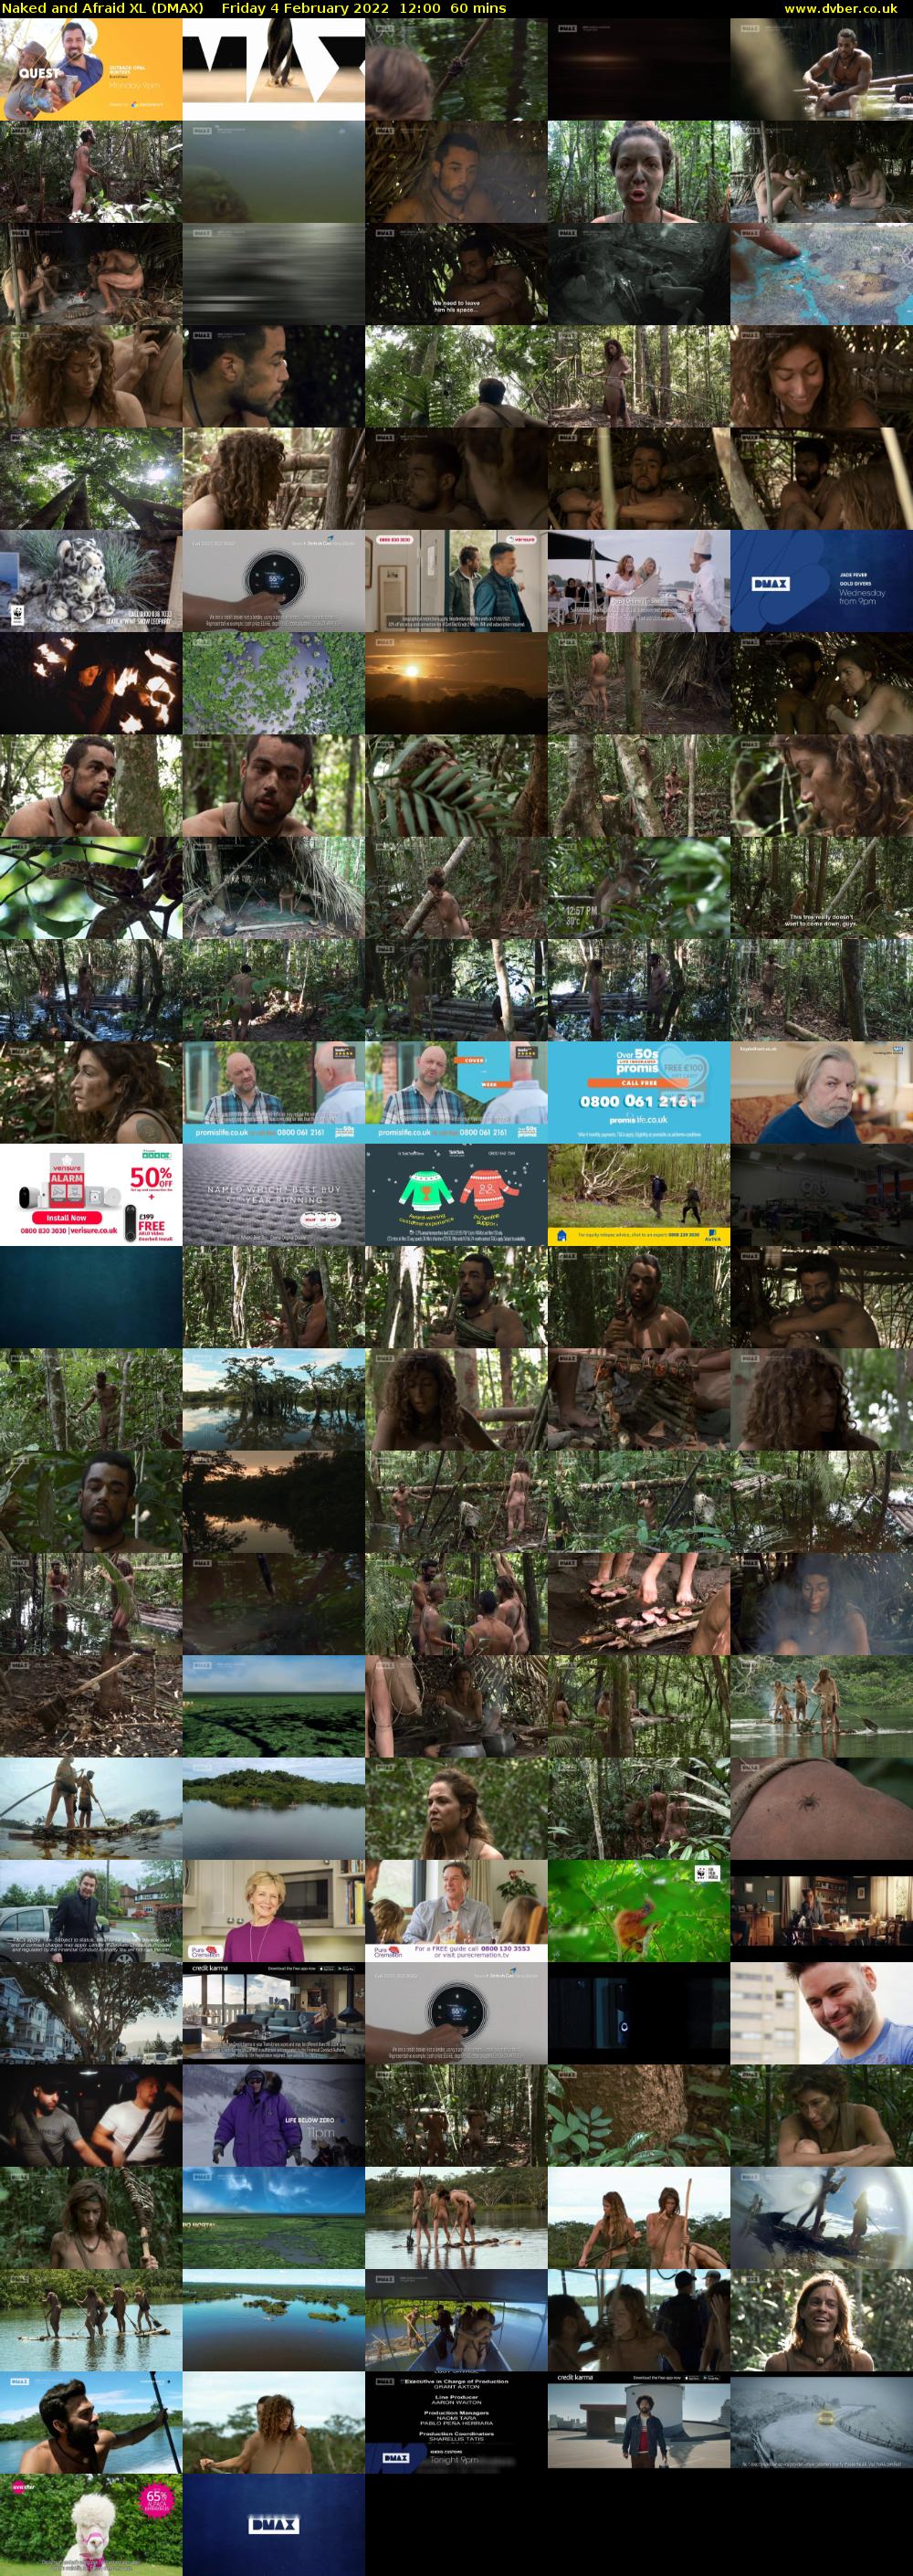 Naked and Afraid XL (DMAX) Friday 4 February 2022 12:00 - 13:00